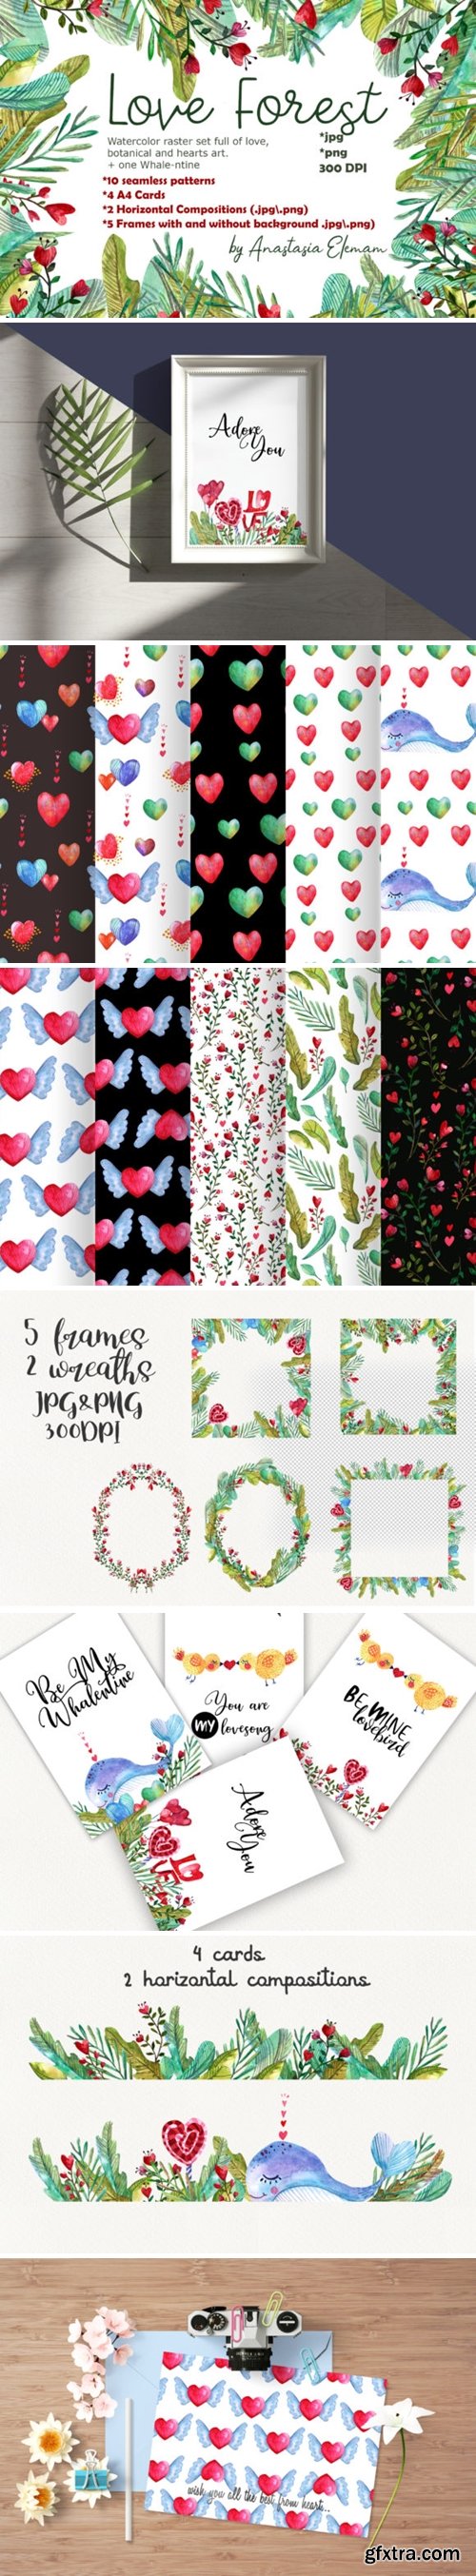 Love Forest Watercolor Set with Patterns 2983605